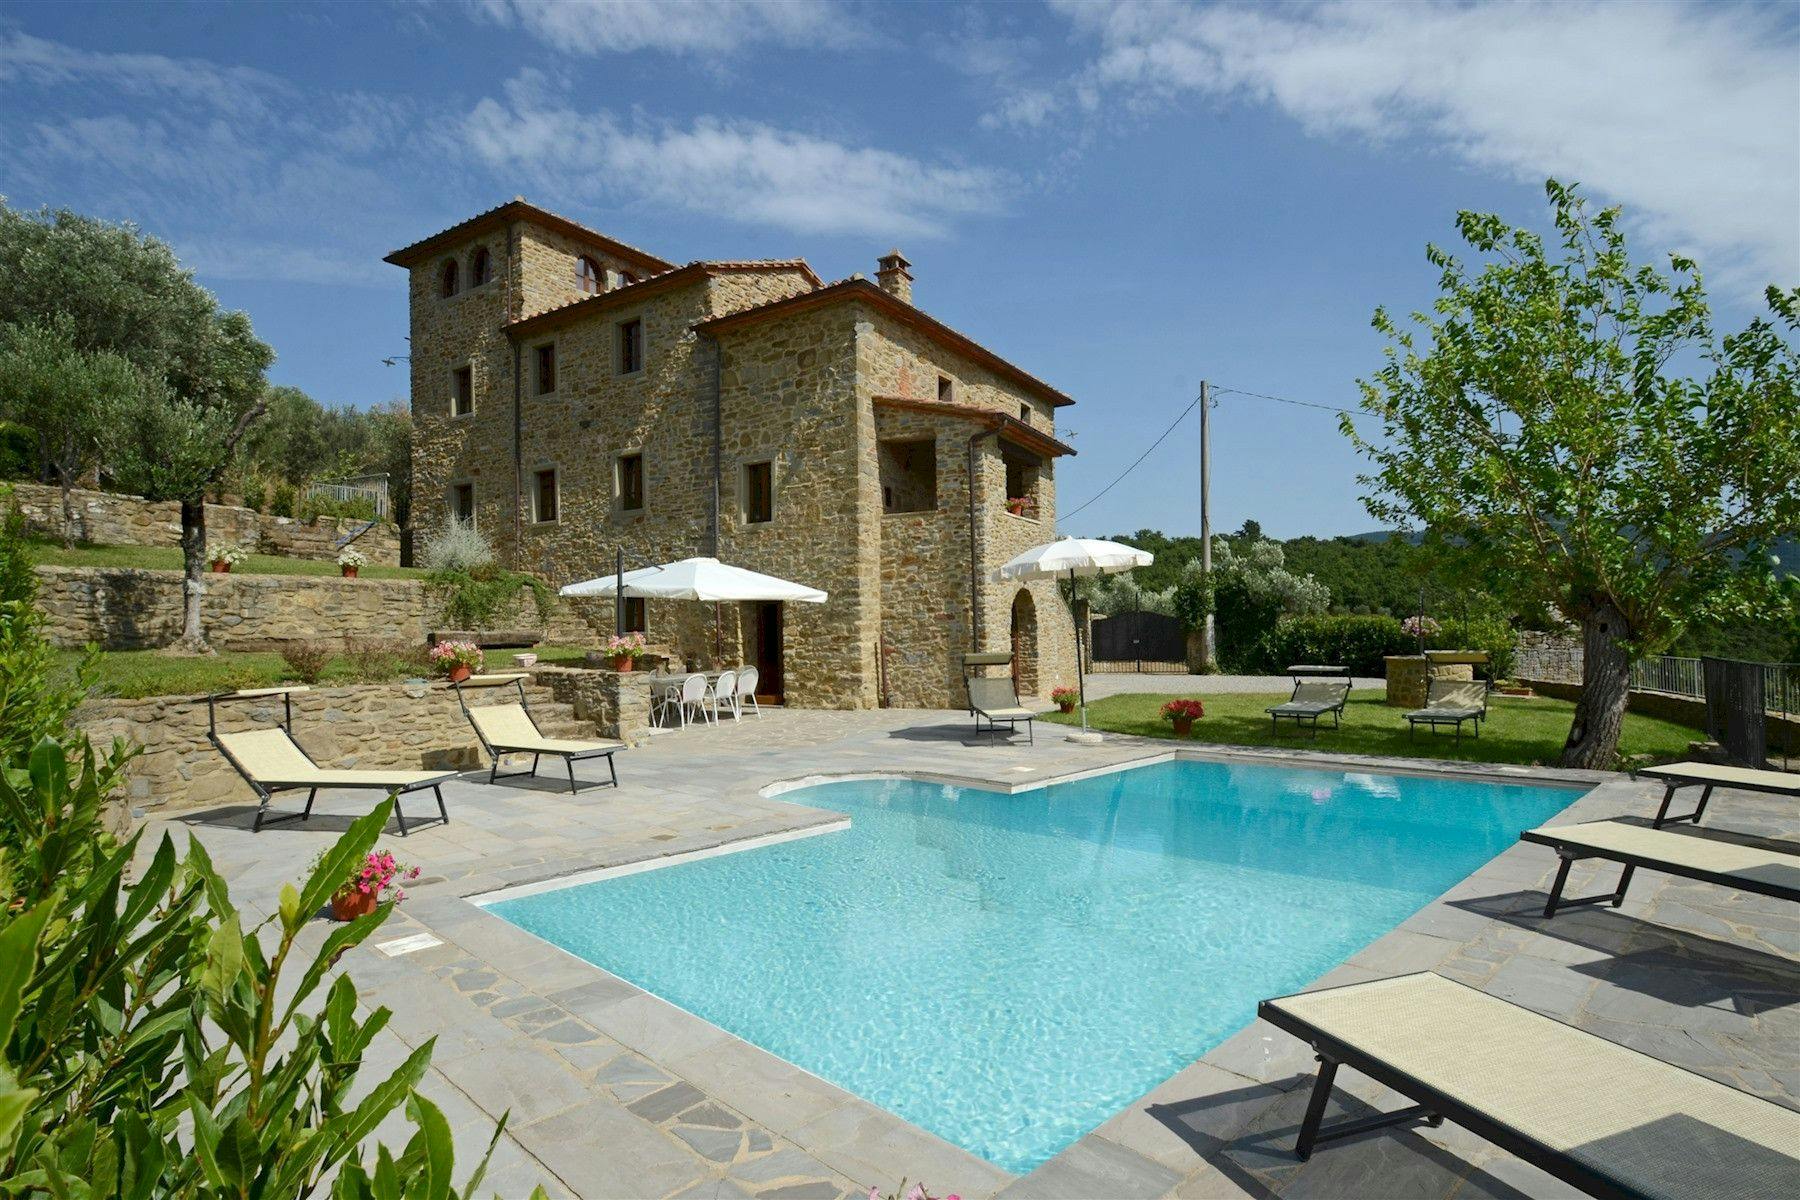 Villas in Arezzo with beautiful pools Torre La Ripa traditional farmhouse-style home with outside pool